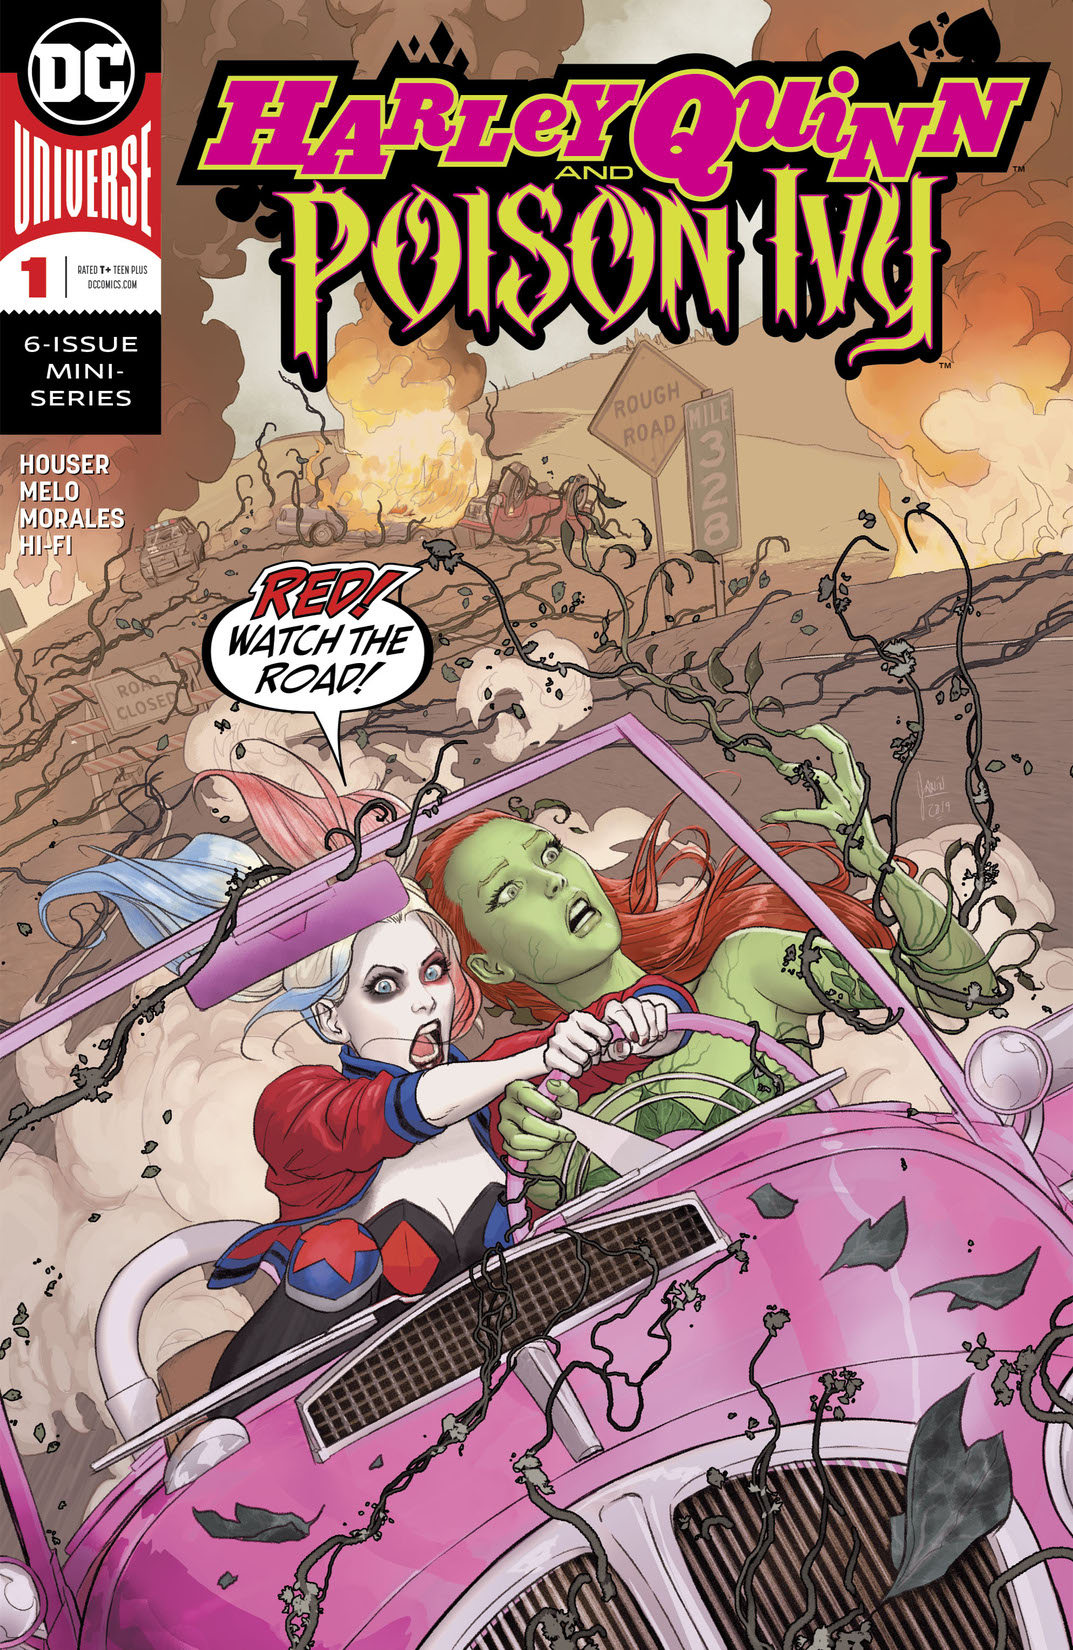 Harley Quinn & Poison Ivy #1 preview images